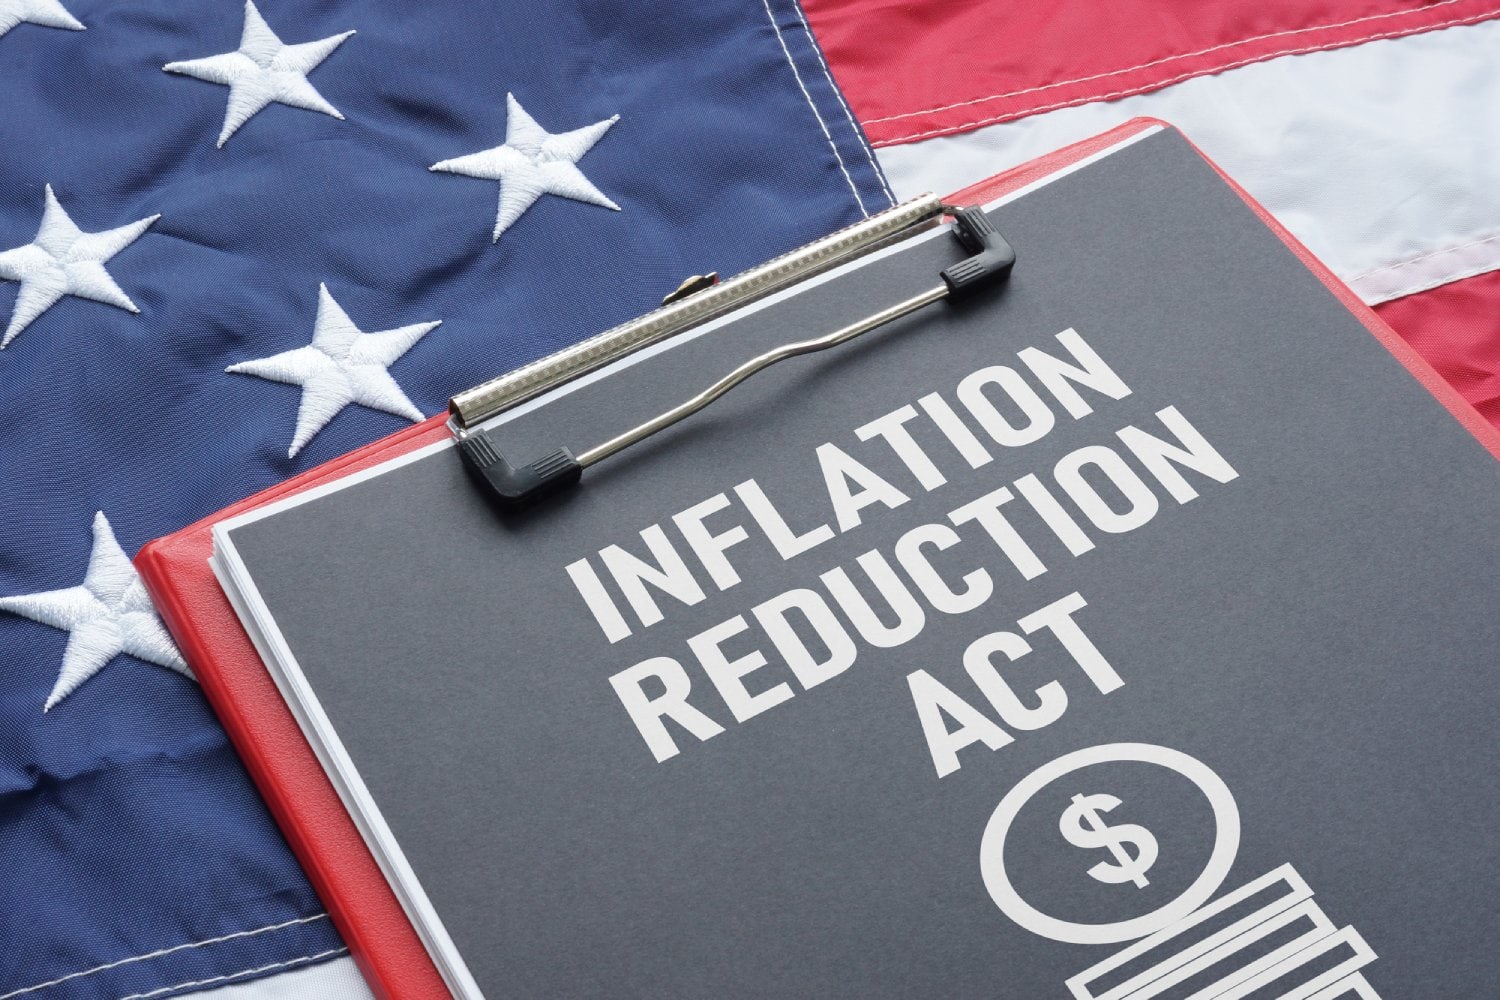 returning-to-the-inflation-reduction-act-homes-rebates